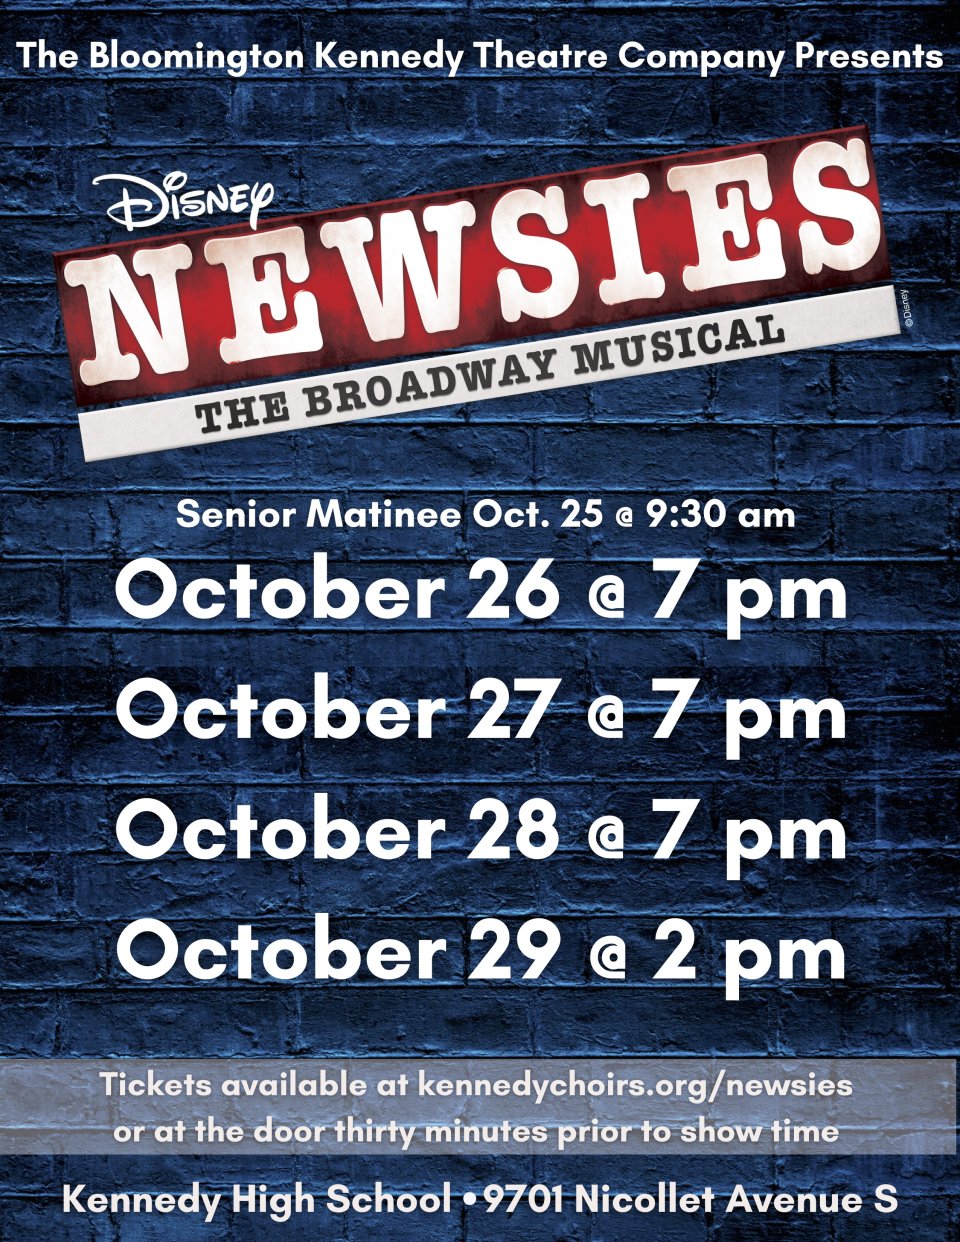 poster with dates for Newsies musical